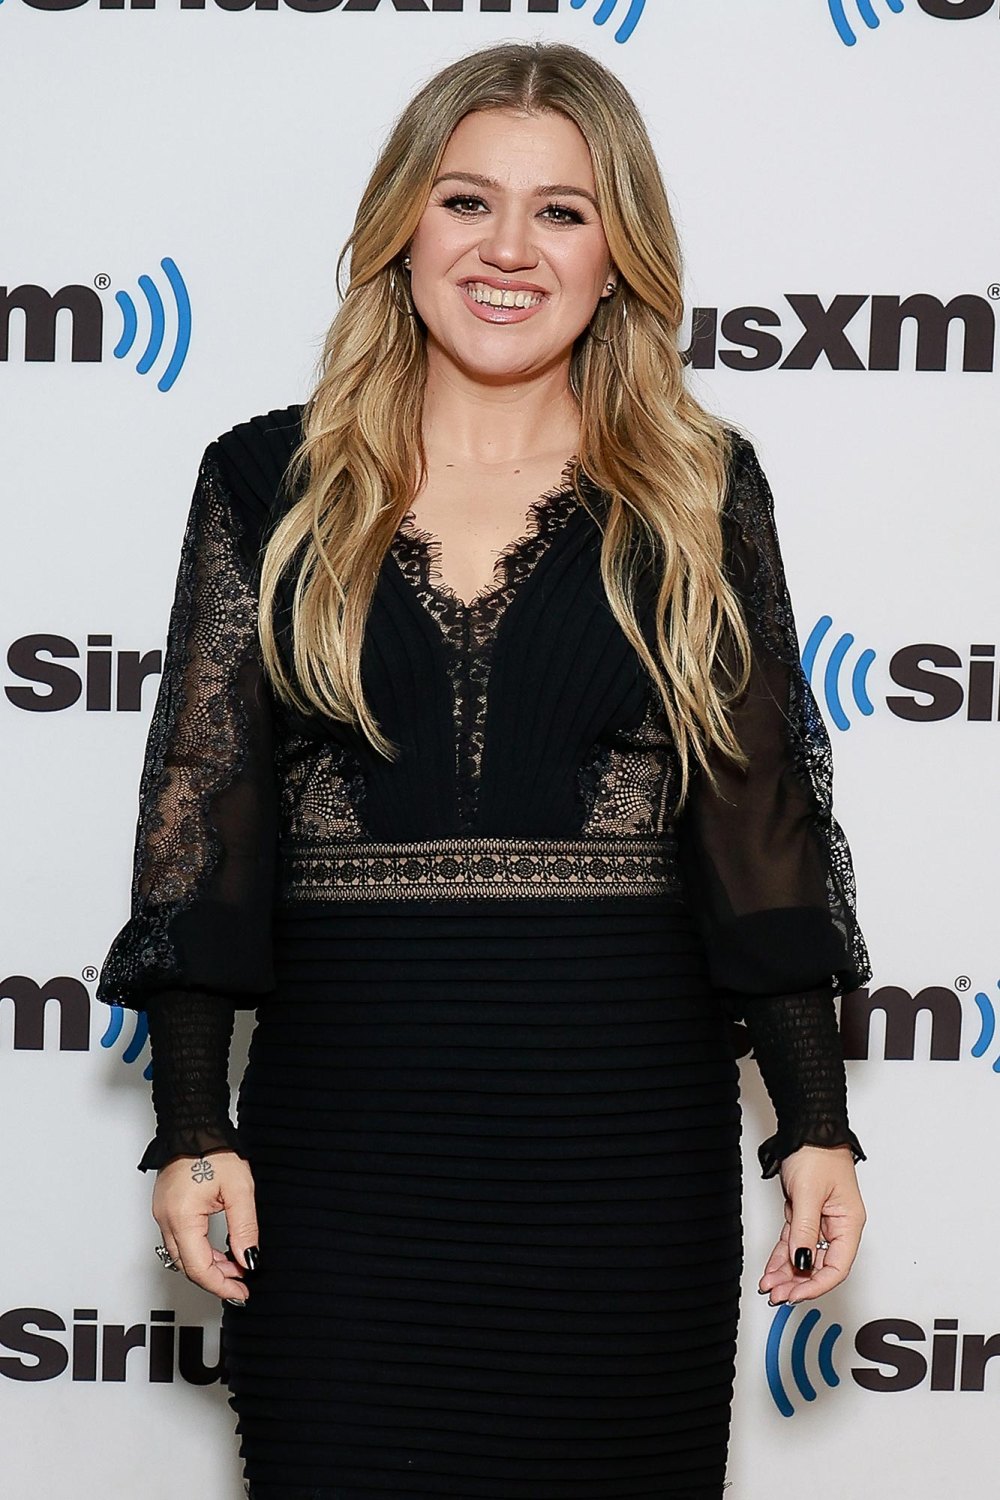 Kelly Clarkson Shares How She Dropped Weight After Her and Her 2 Kids NYC Move